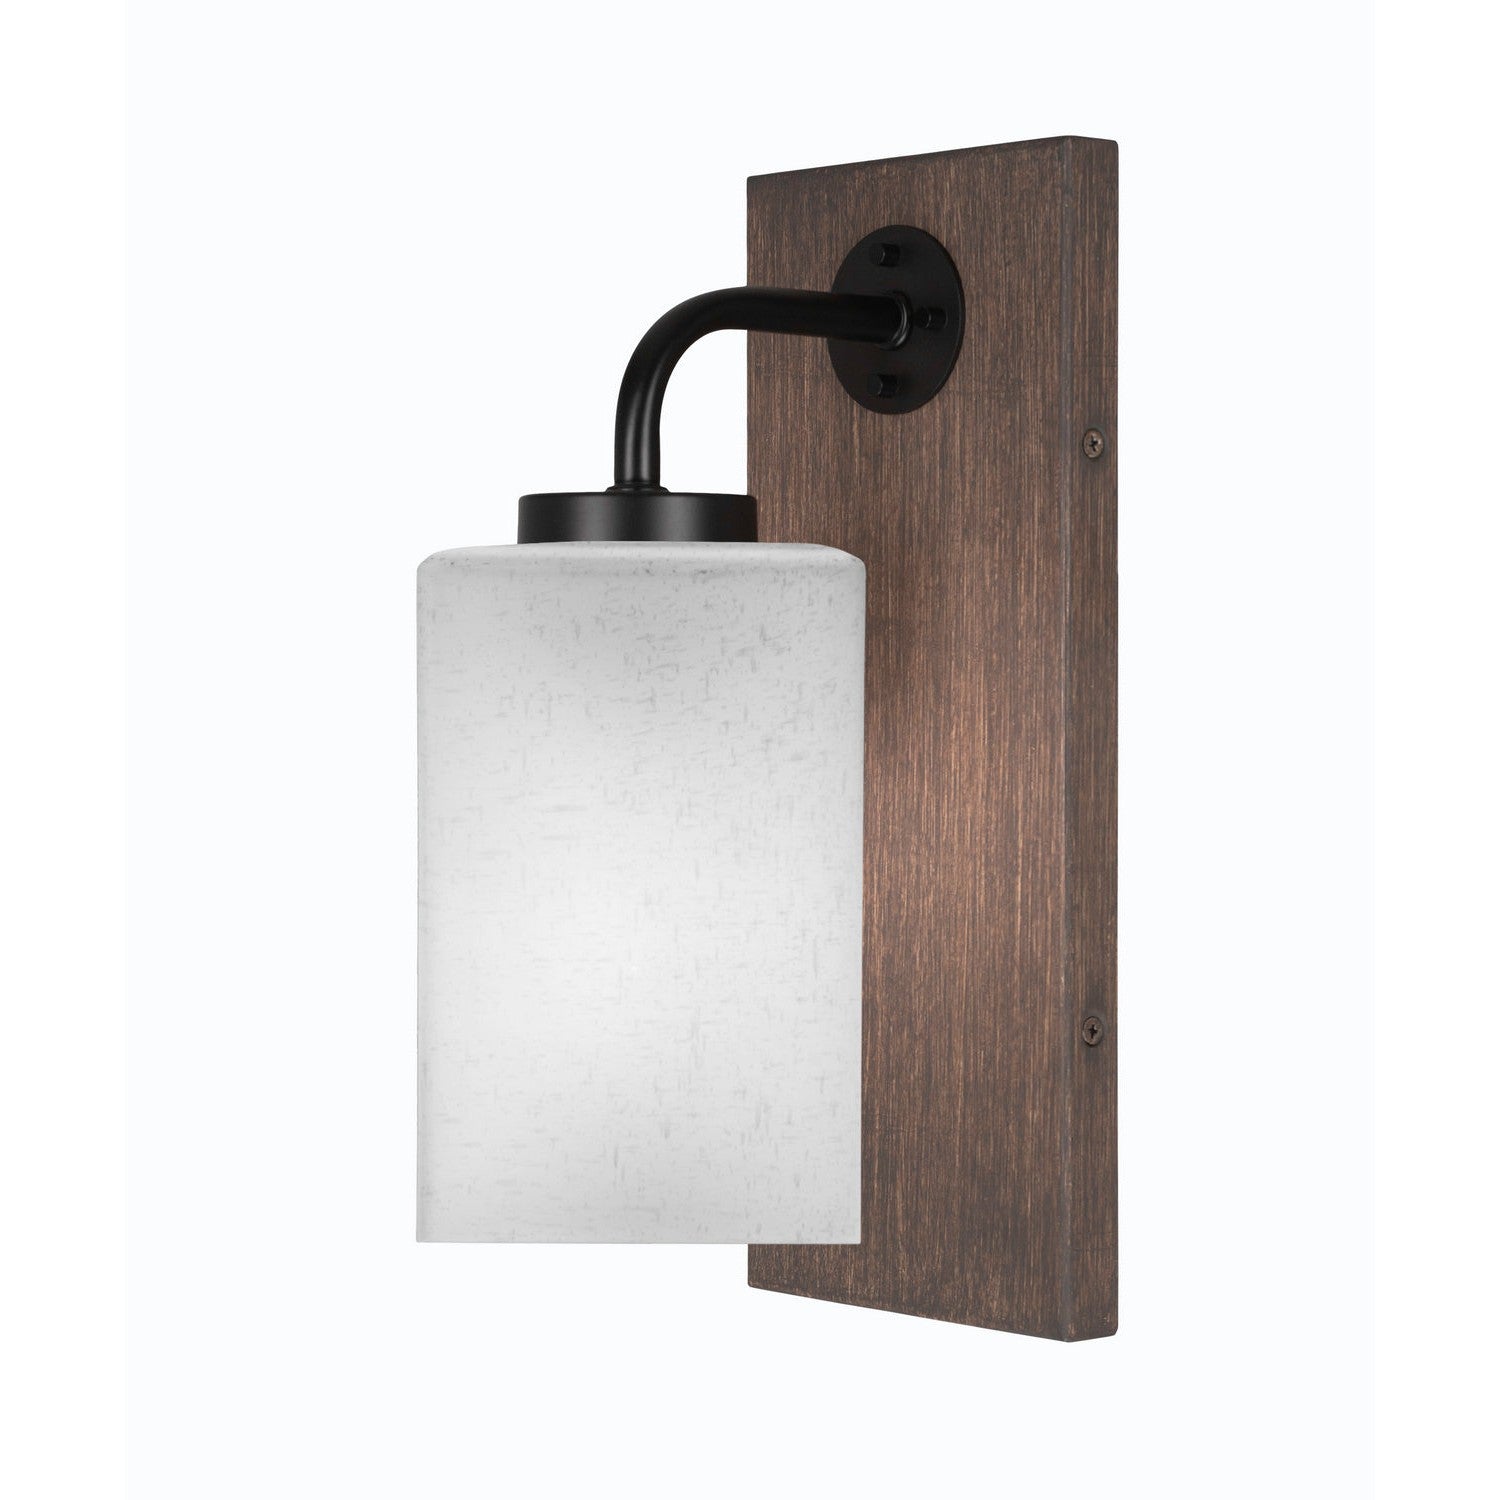 Toltec Oxbridge 1771-mbdw-531 Wall Sconce Light - Matte Black & Painted Distressed Wood-look